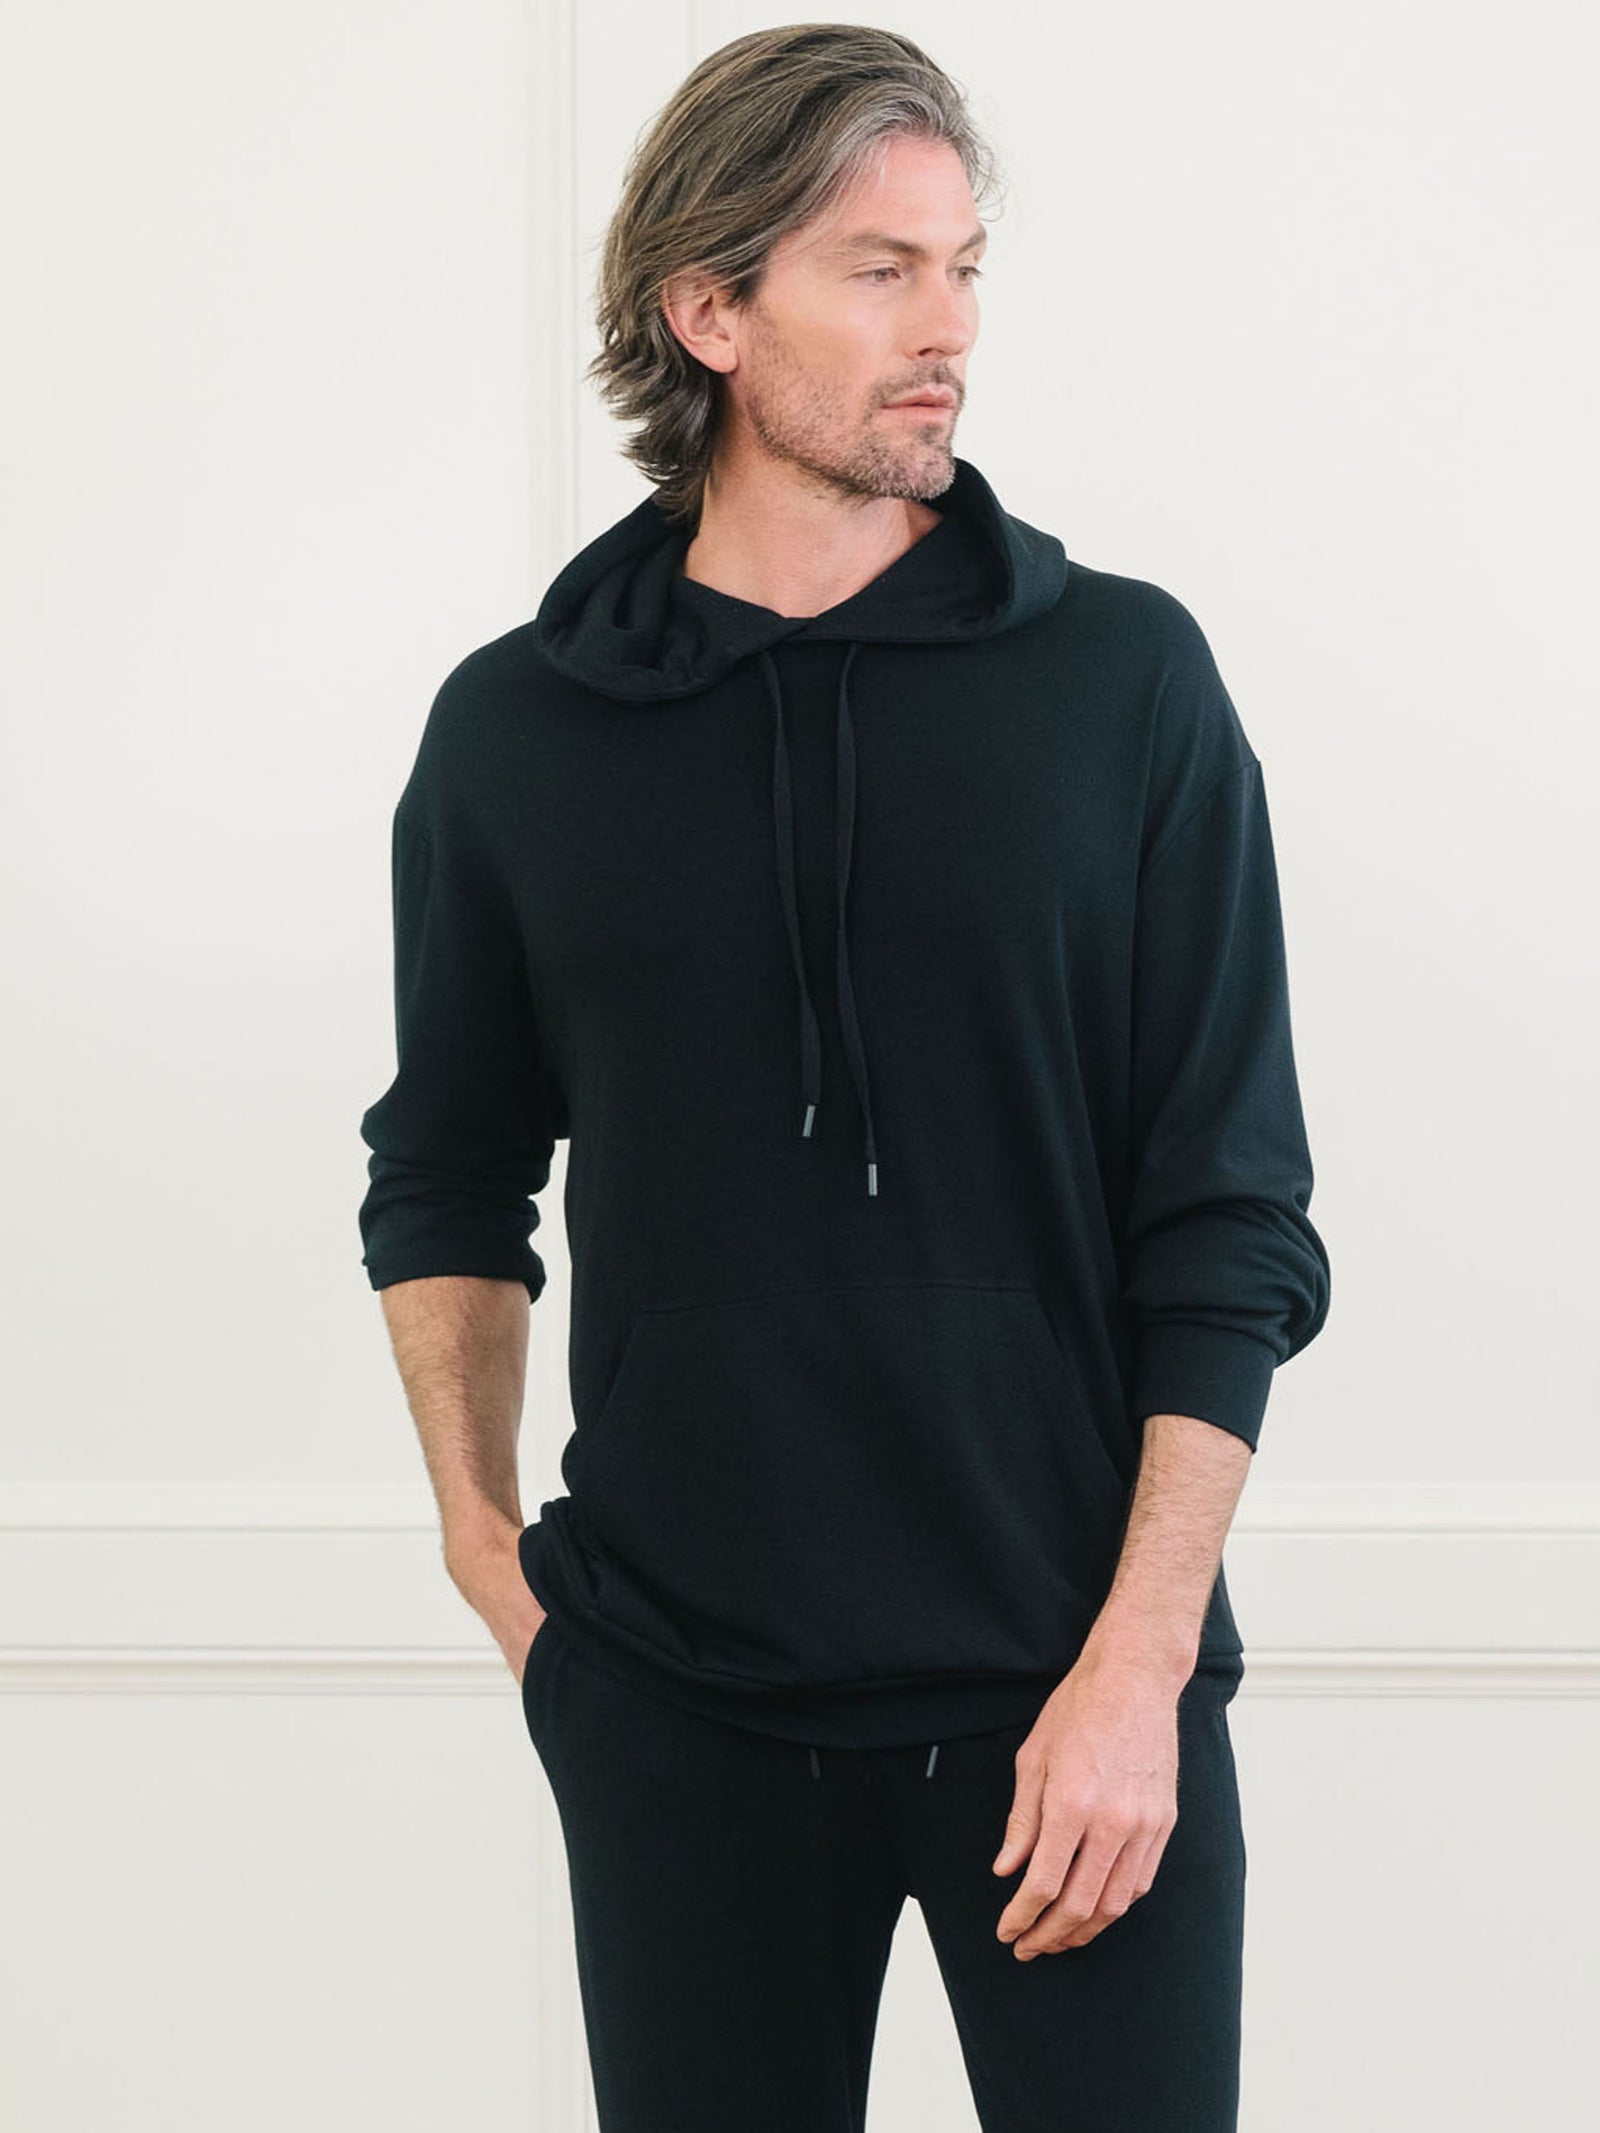 Black Bamboo Hoodie worn by man standing in front of white background.